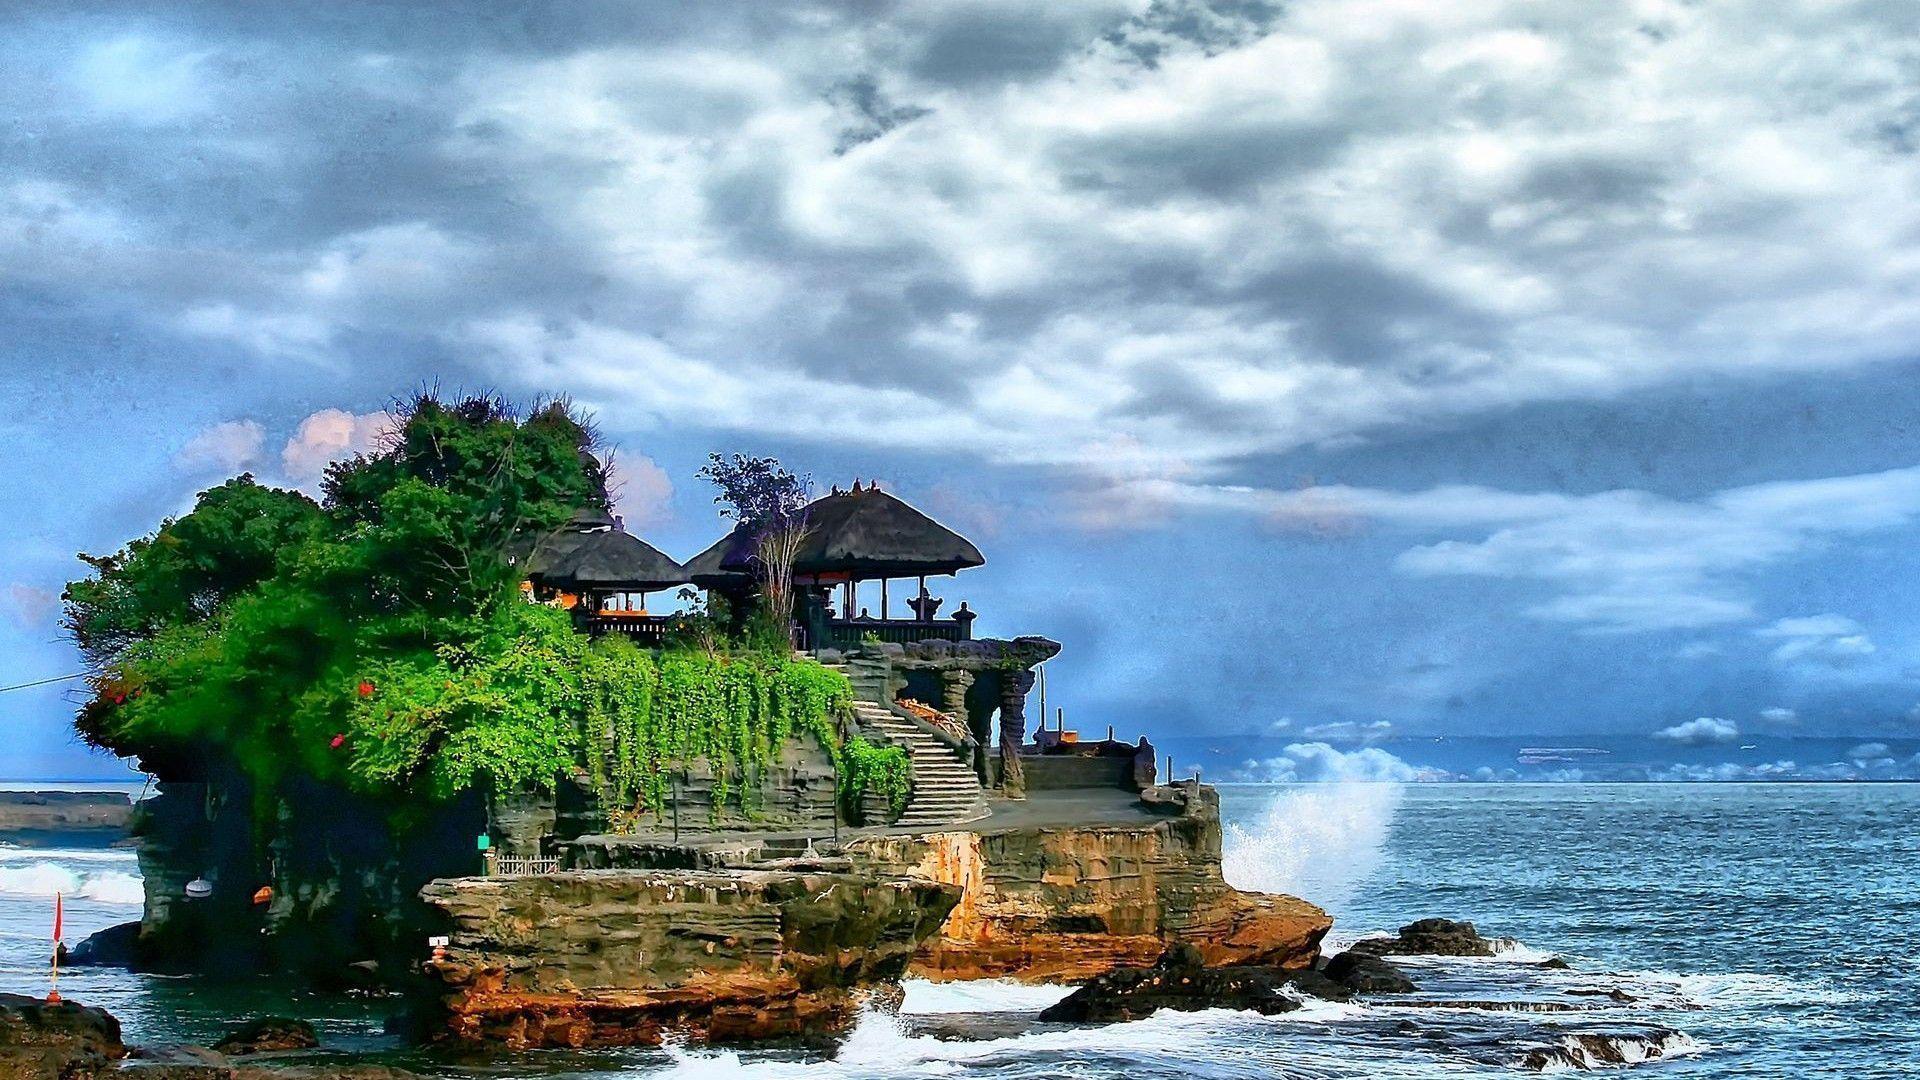 Bali Indonesia Hd Wallpapers Top Free Bali Indonesia Hd Backgrounds Wallpaperaccess